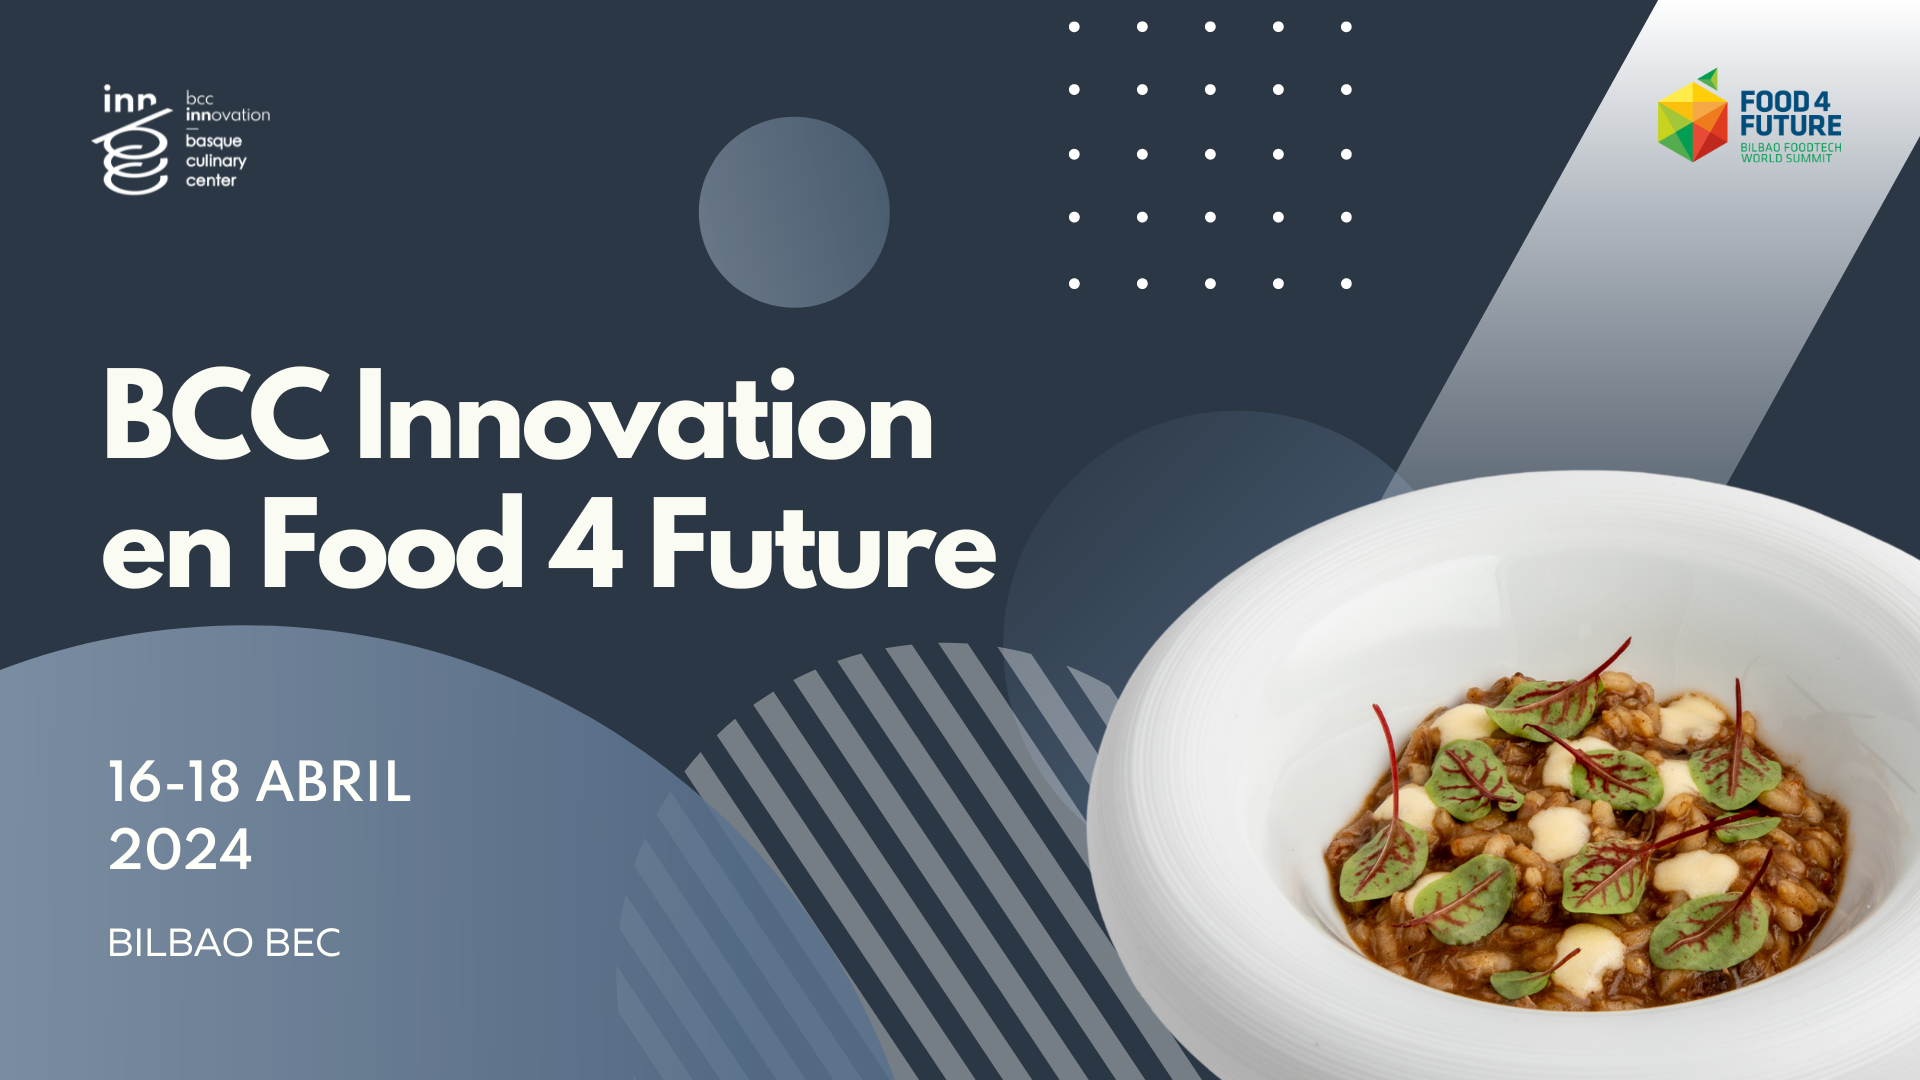 We return once again to FOOD 4 FUTURE – EXPO FOODTECH